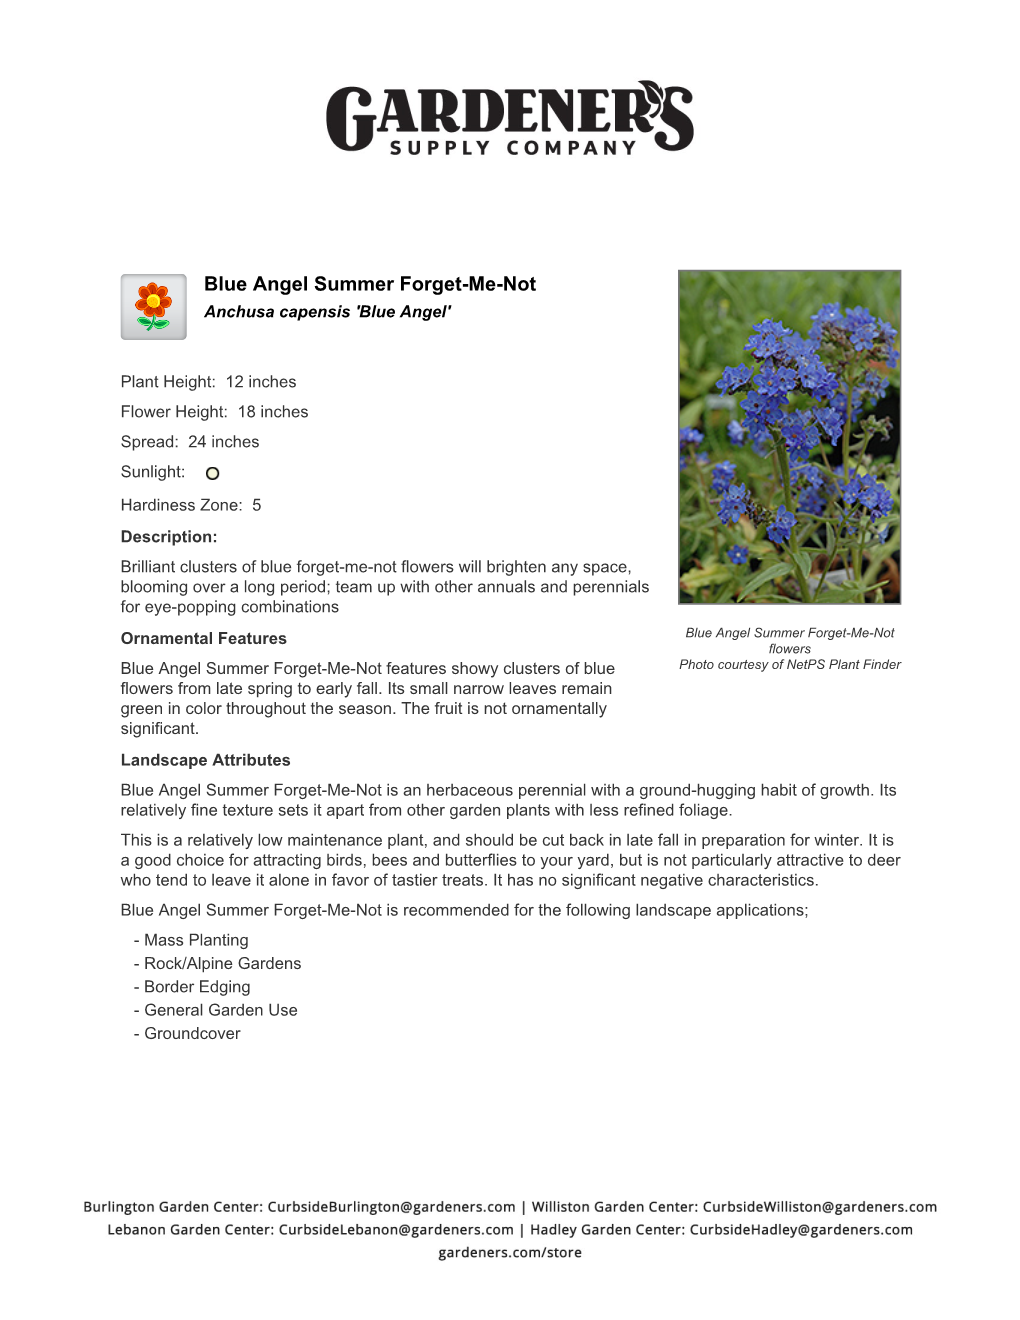 Gardener's Supply Company Blue Angel Summer Forget-Me-Not